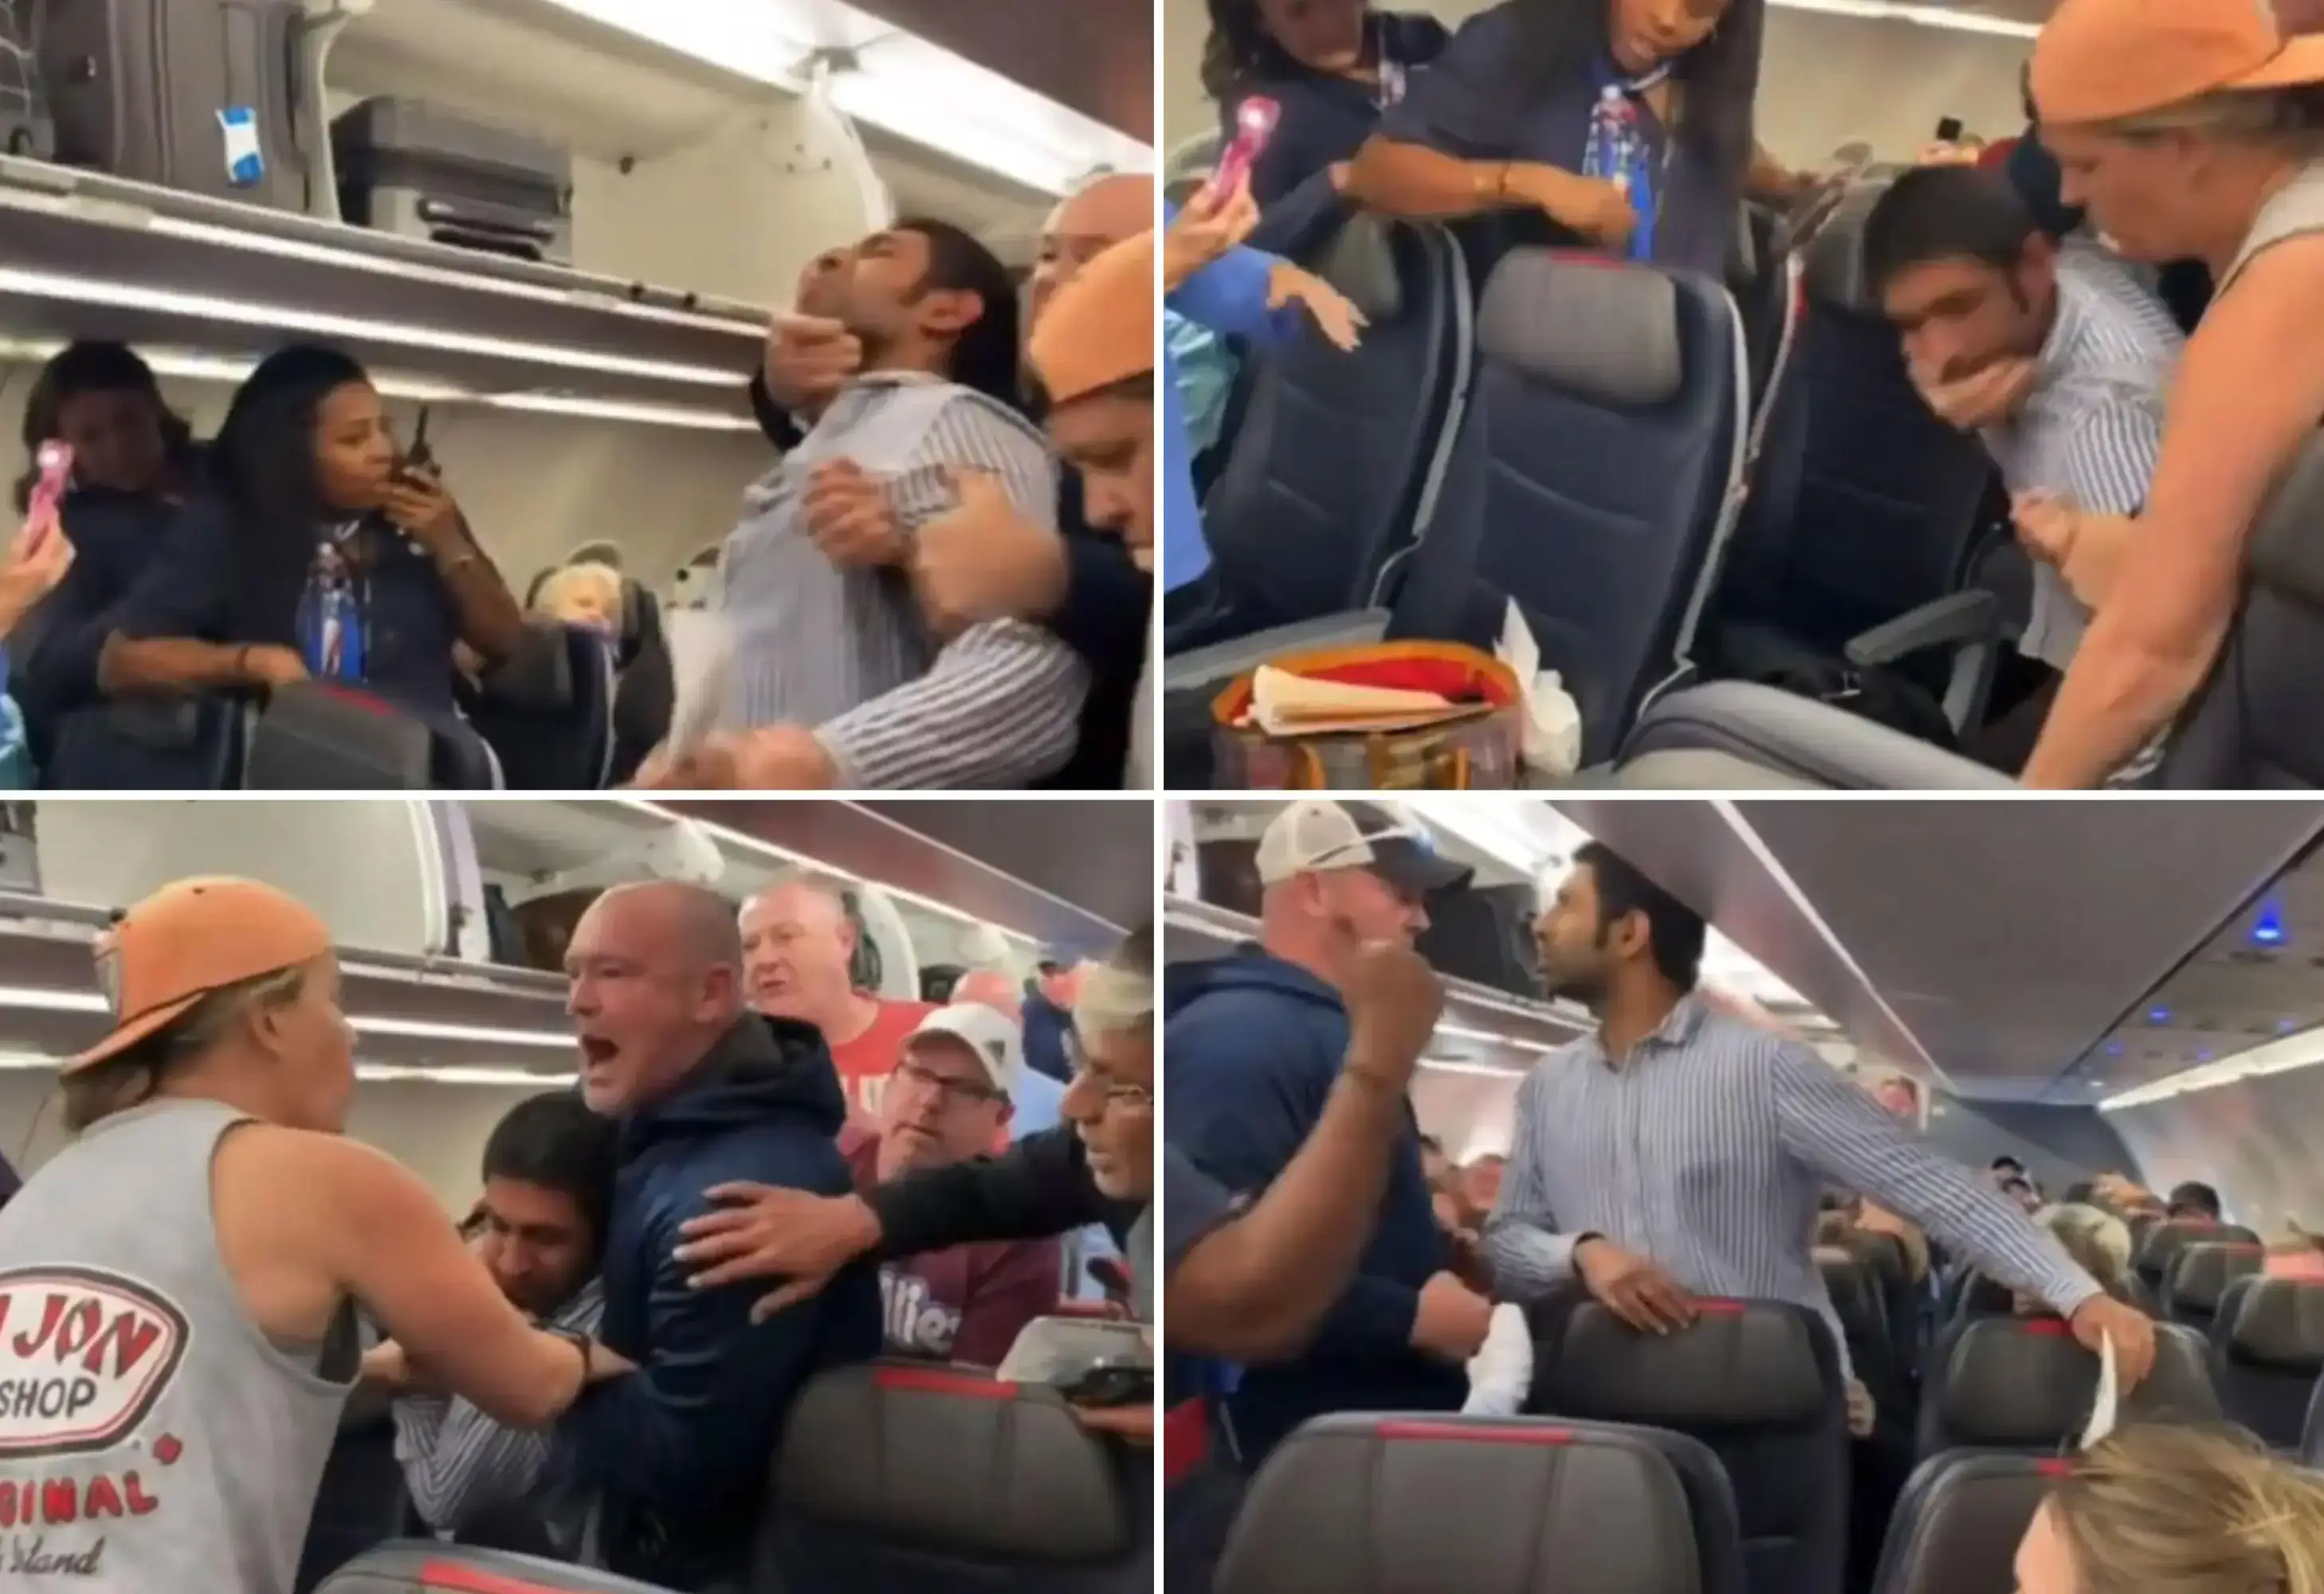 American Airlines passenger put in headlock, removed from plane after shouting anti-Semitic slur